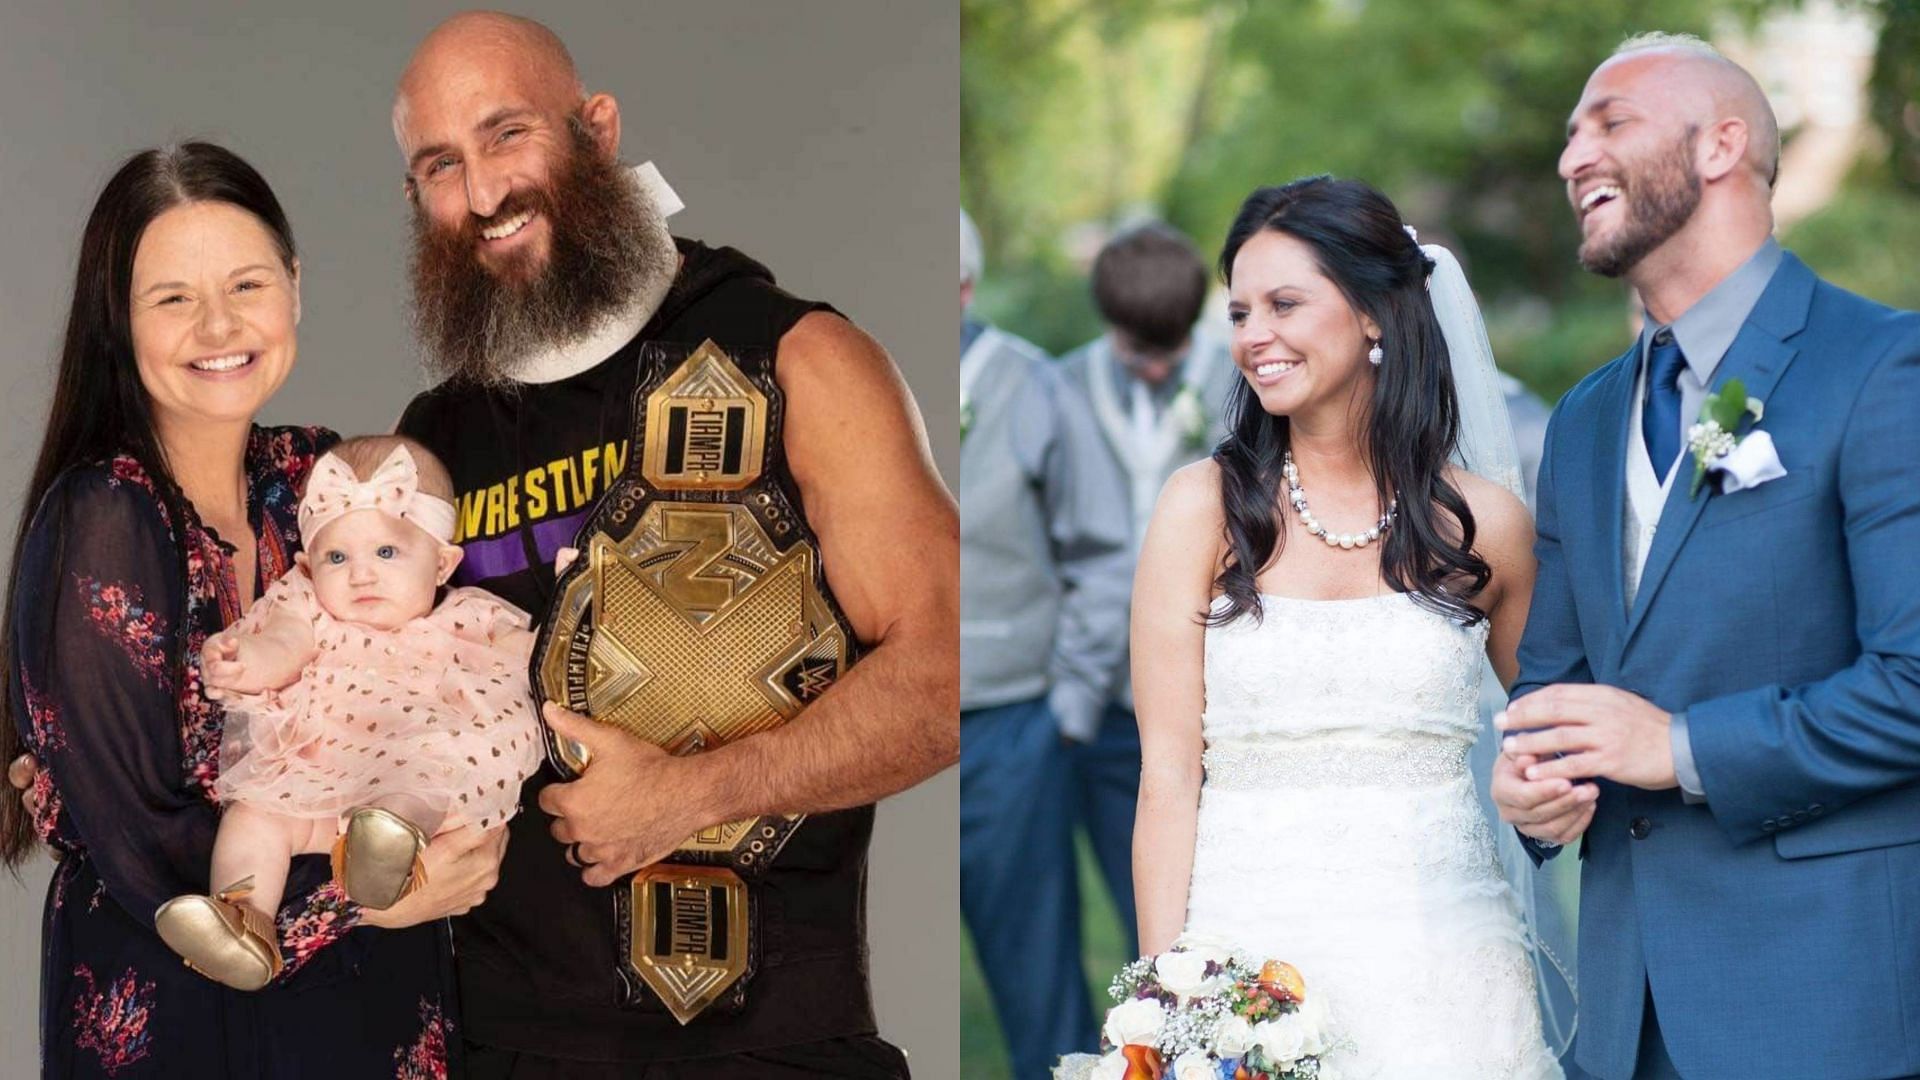 Ciampa&#039;s wife, Jessie Ward, worked as a backstage producer